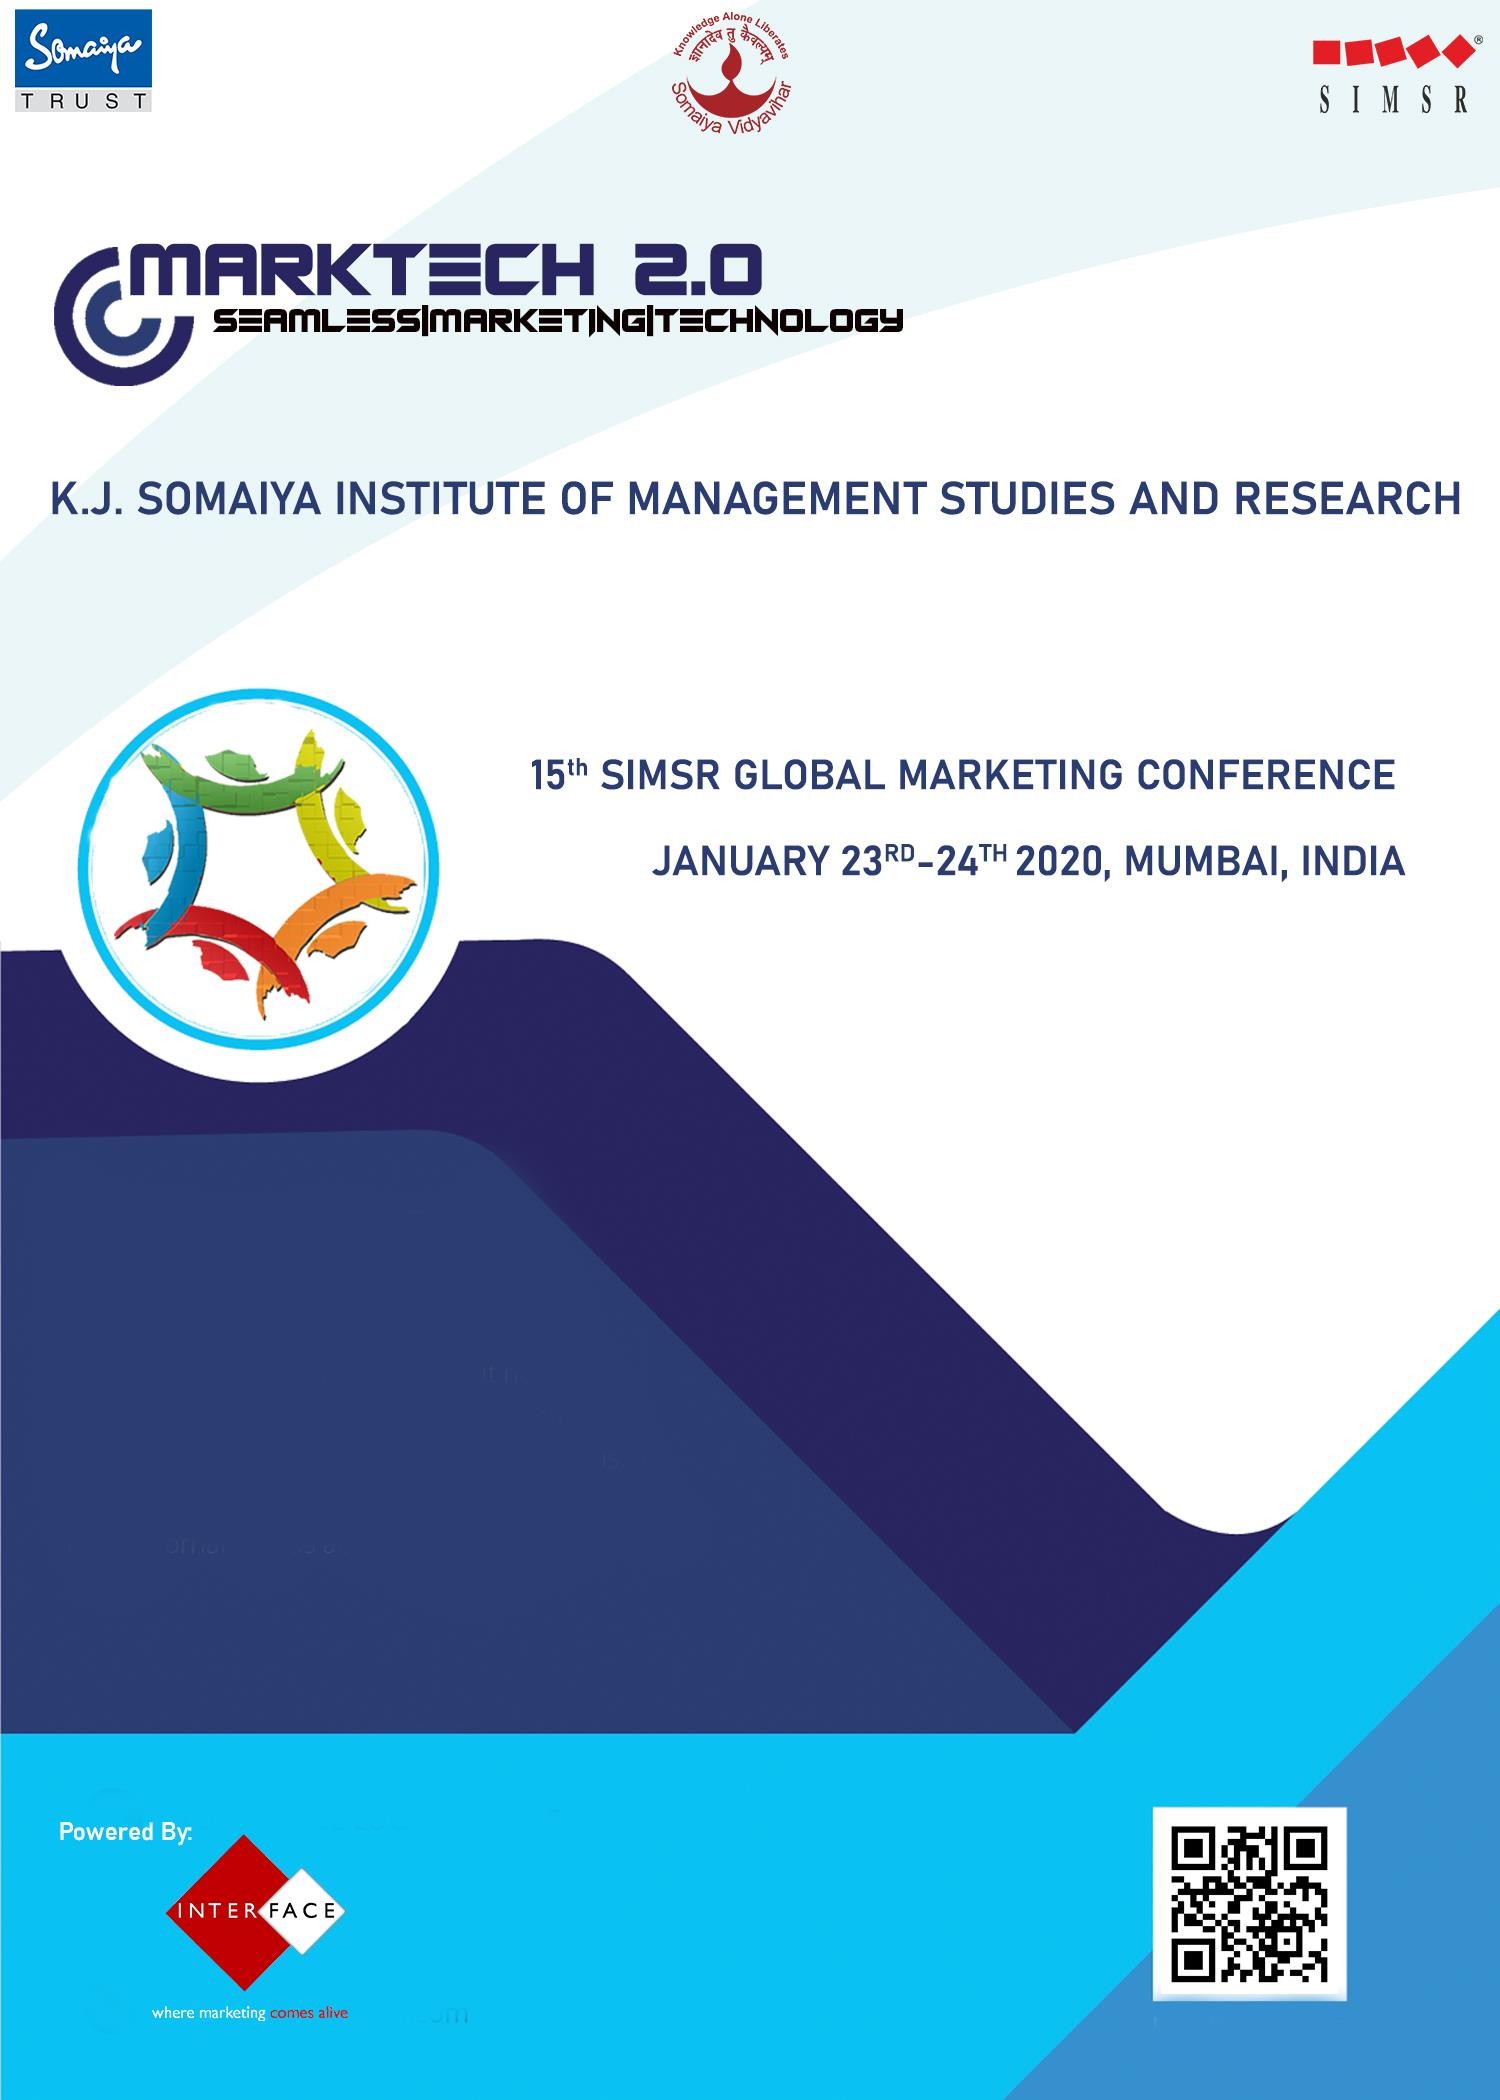  15th SIMSR Global Marketing Conference (January 23 -24, 2020)